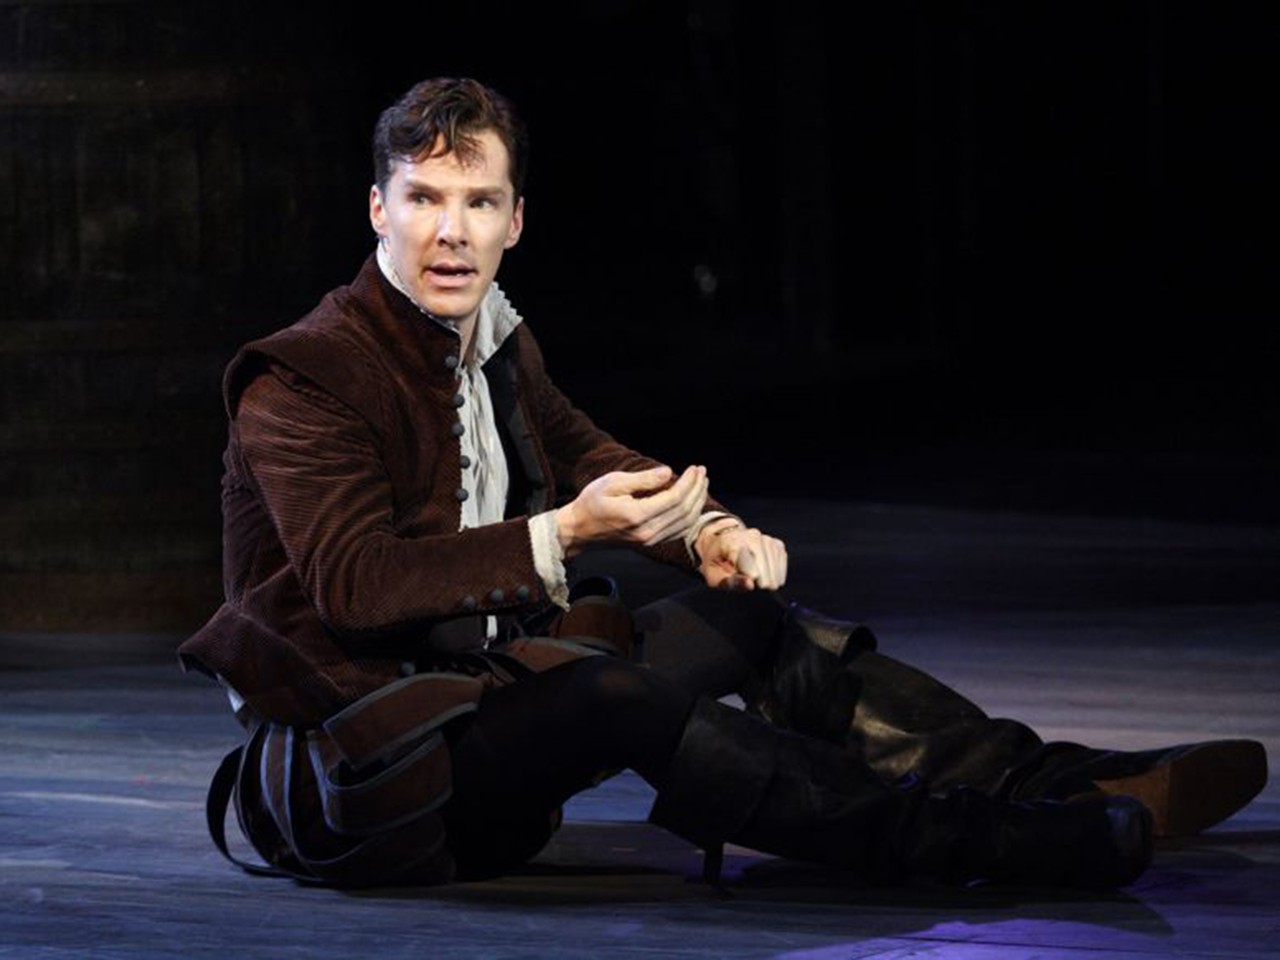 Hamlet Sun., April 10 Film Best known for playing Sherlock Holmes in the series Sherlock, British actor Benedict Cumberbatch has recently received a number of awards for his acting prowess. Nominated for an Oscar for his role in The Imitation Game, he comes to acting from a true thespian's point of view. So it shouldn't come as a surprise that he stars in the National Theatre production of Hamlet. See the play as it's broadcast today at 11 a.m. at the Cedar Lee Theatre. Tickets are $20.